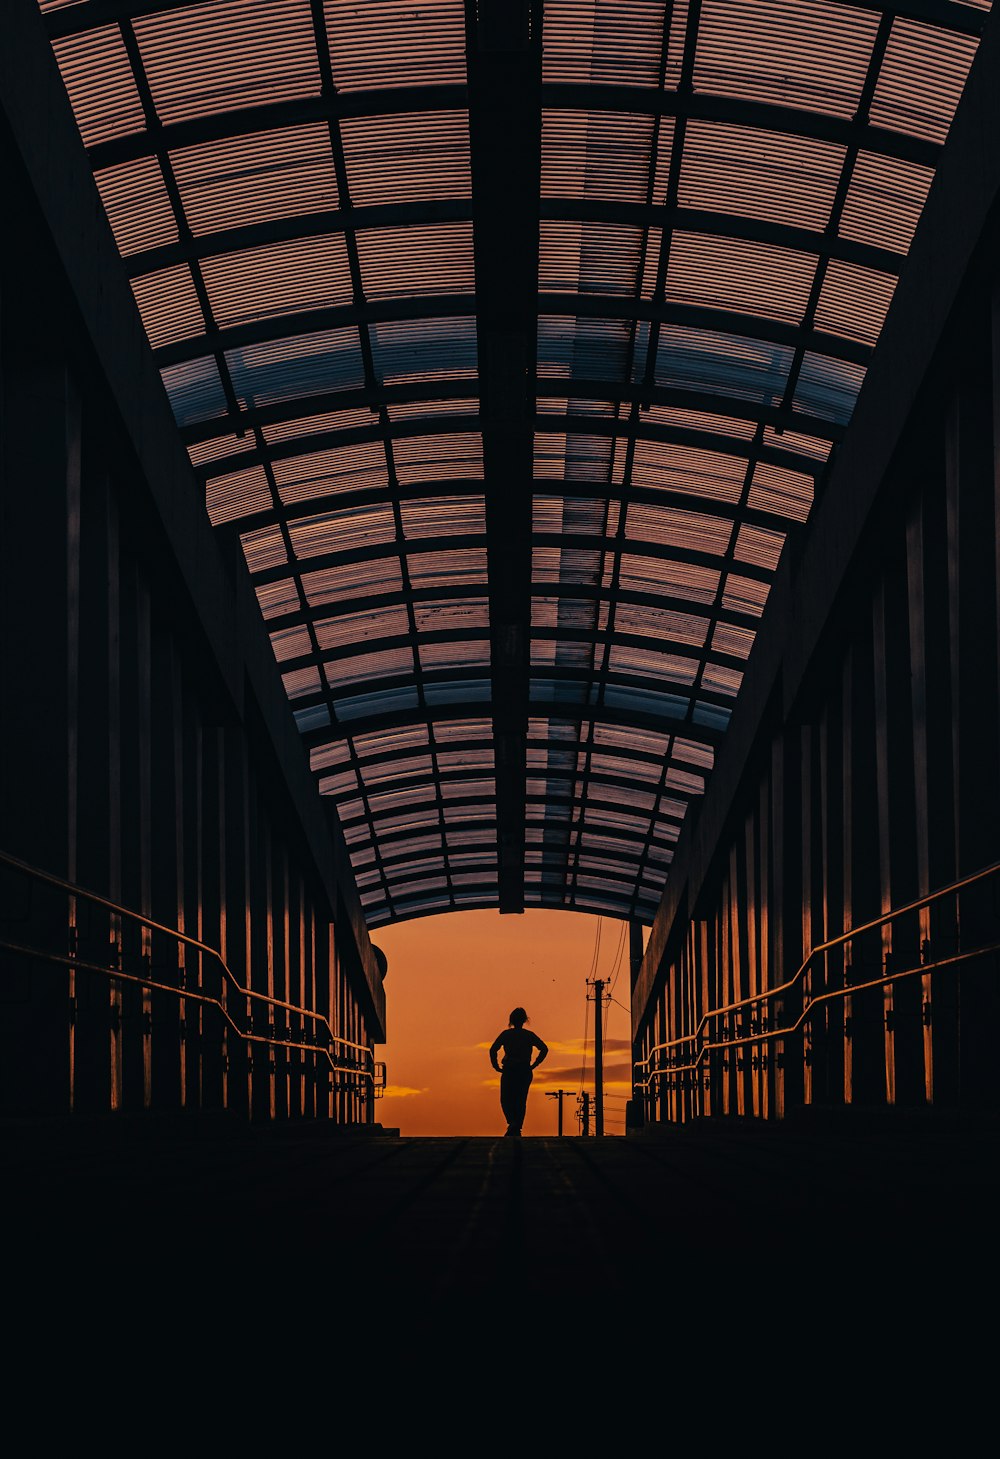 a silhouette of a person standing in a train station